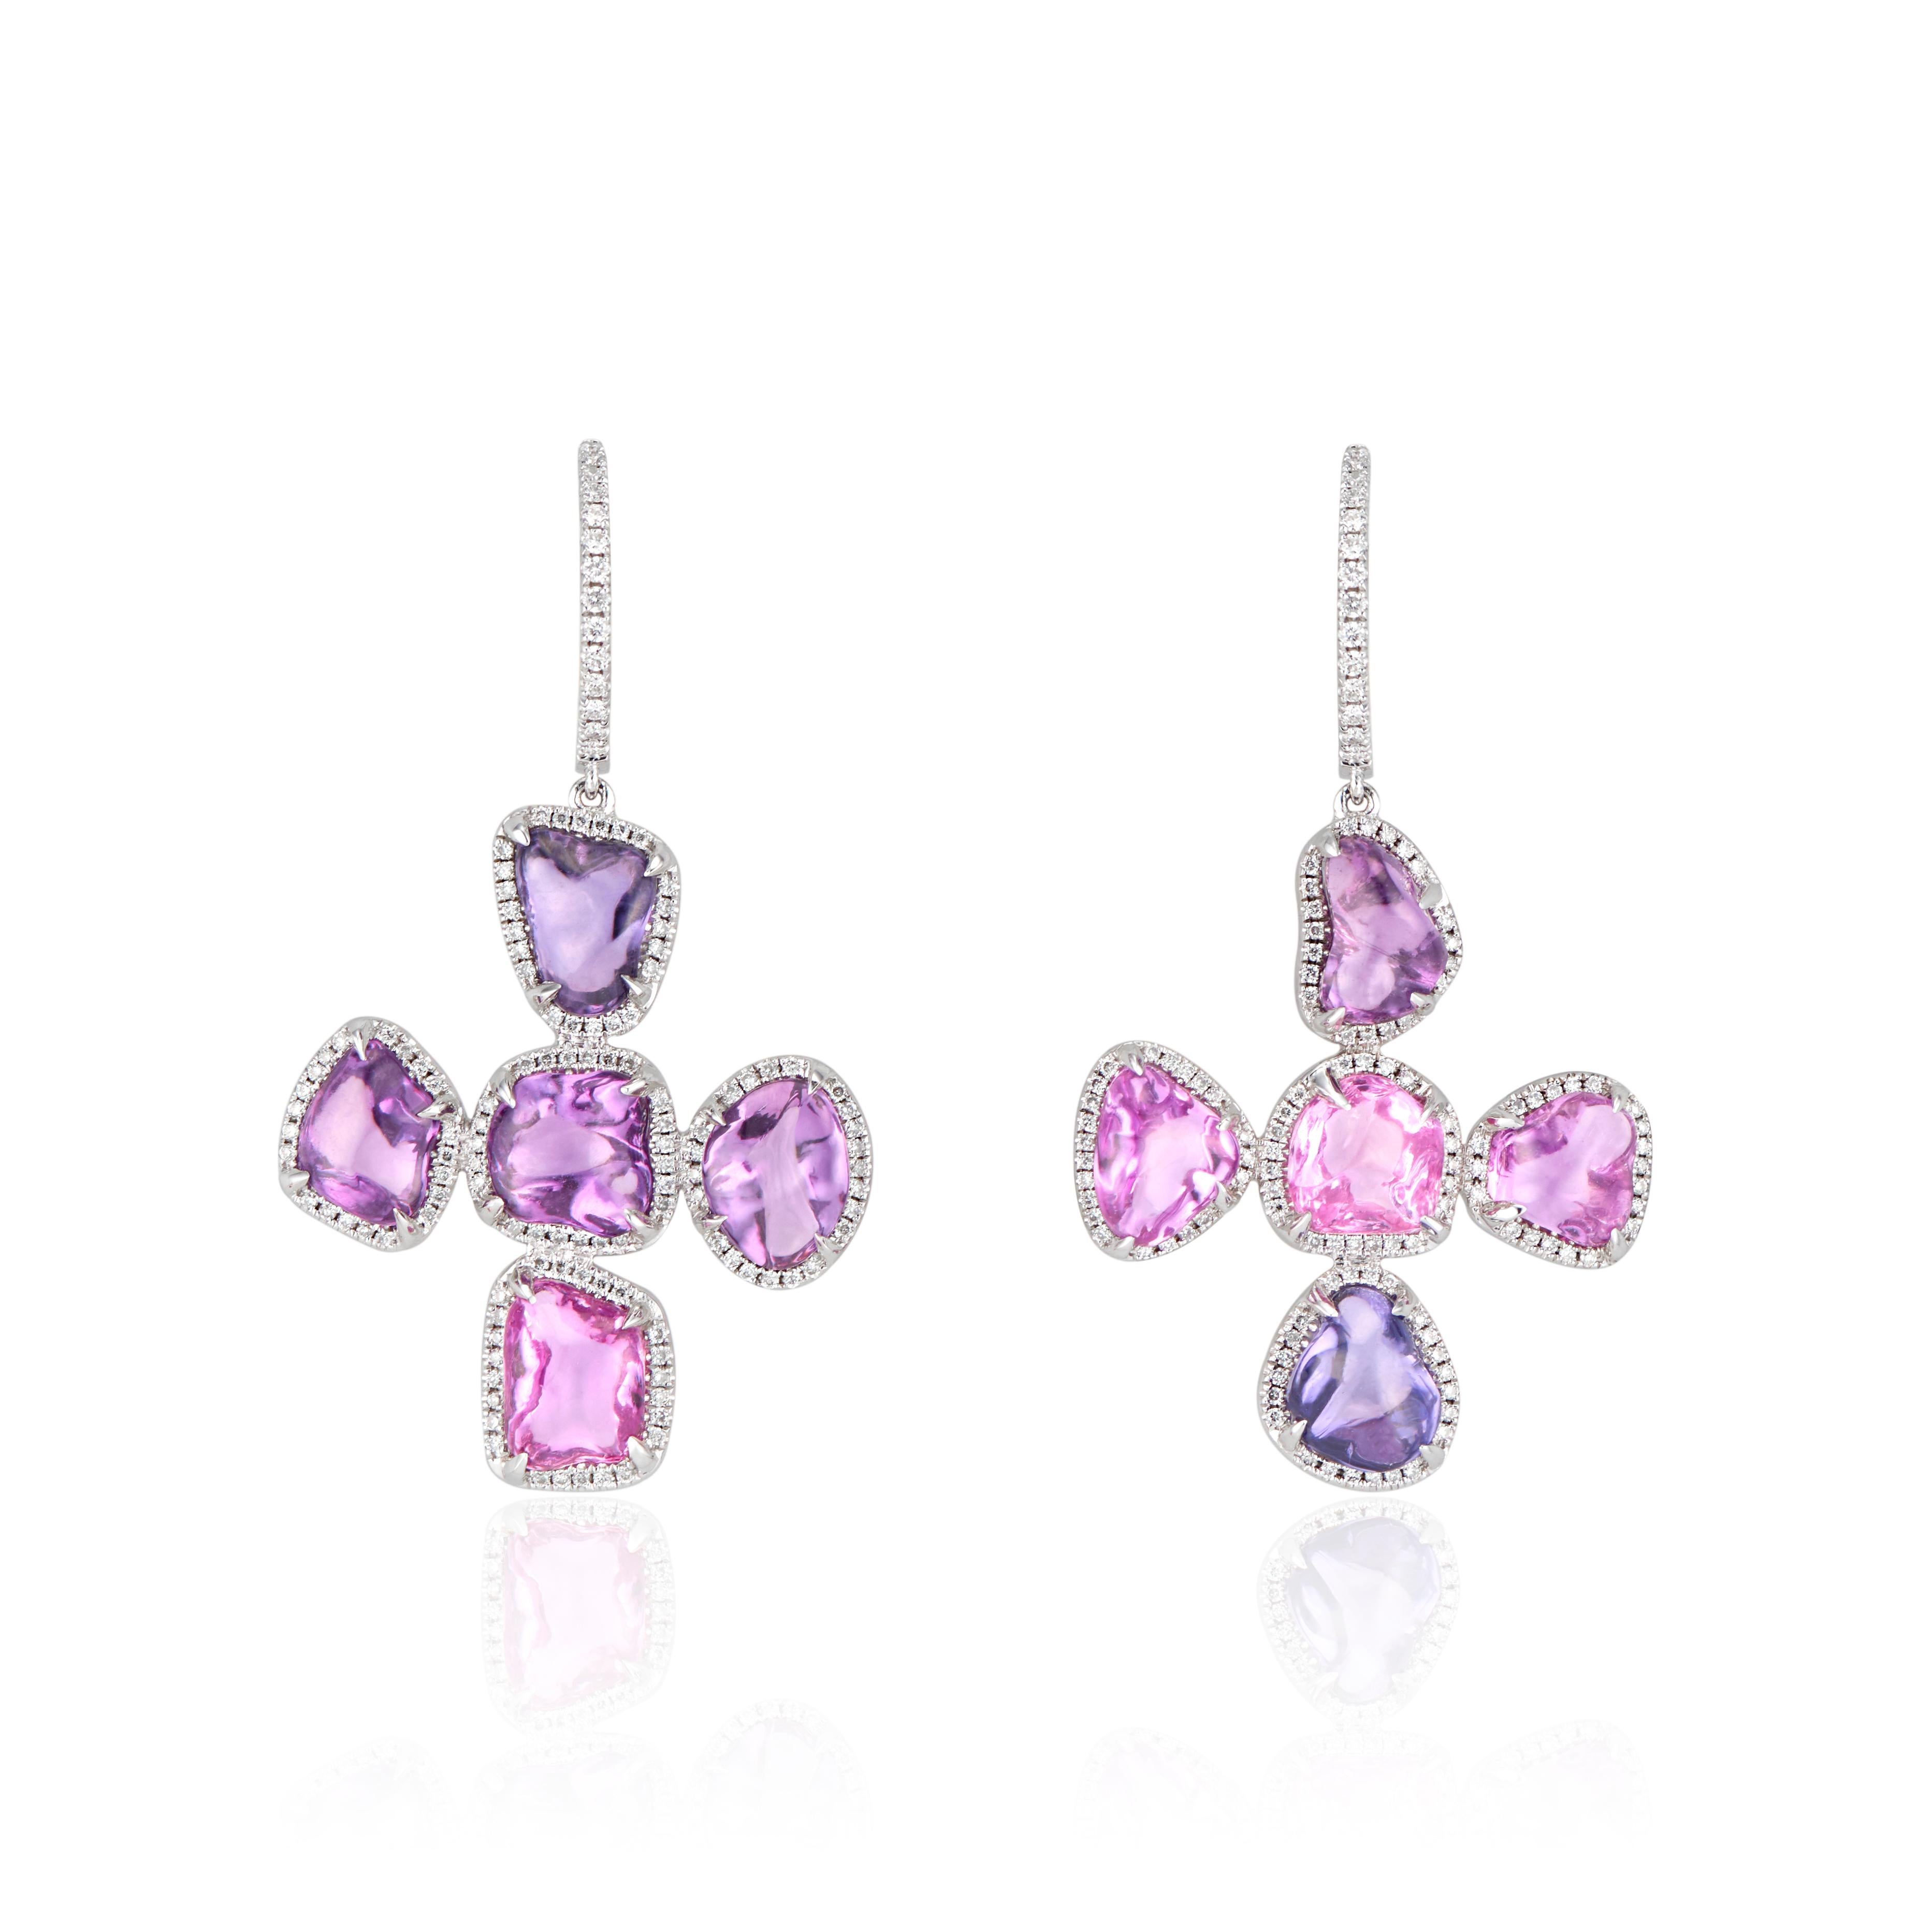 Spectacular no-heat pink and purple sapphires of 15.06 ctw and 0.38 ctw diamonds set in 18k white gold.